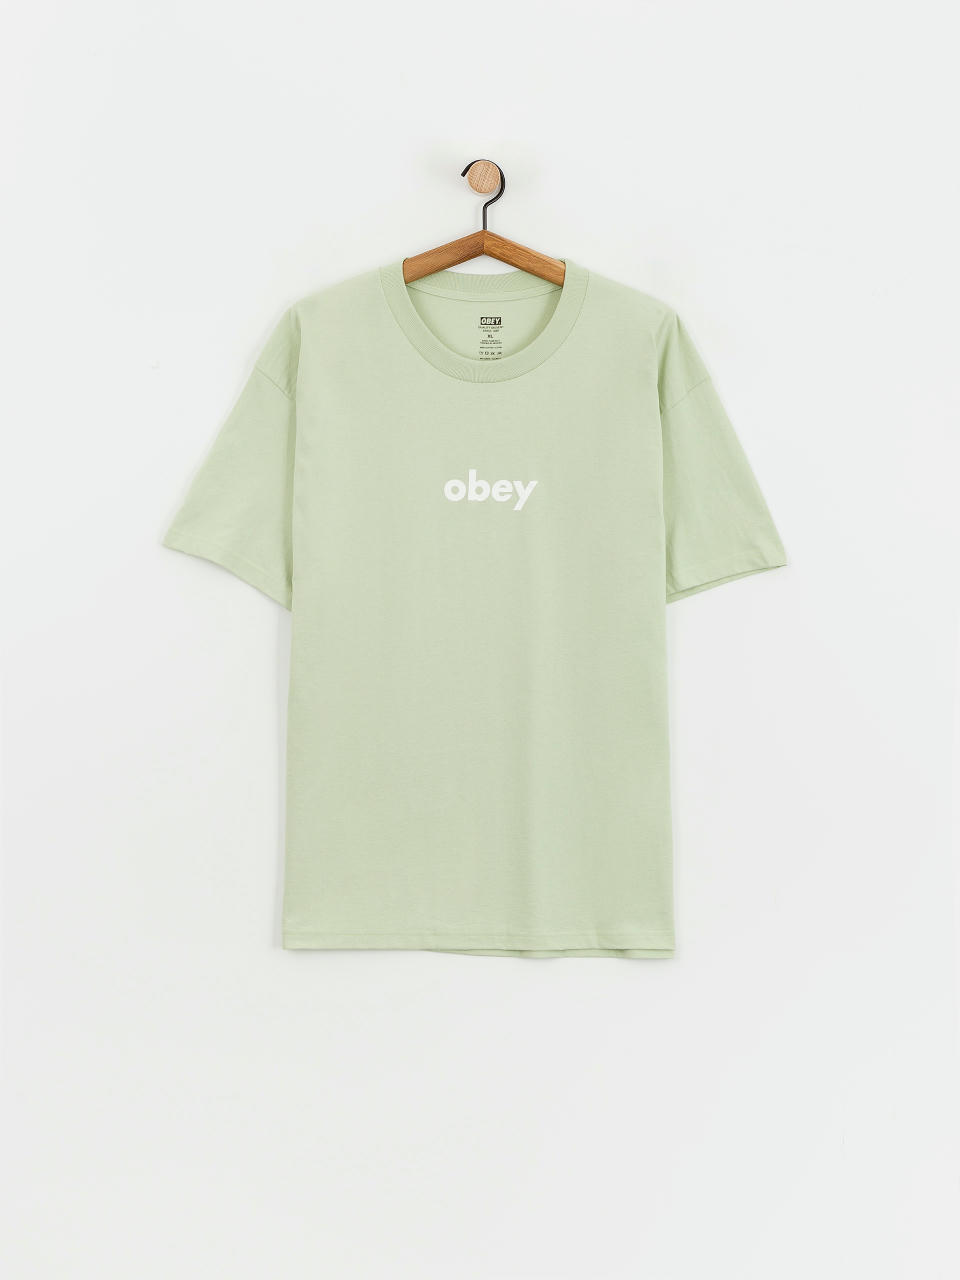 OBEY T-Shirt Lower Case 2 (cucumber)